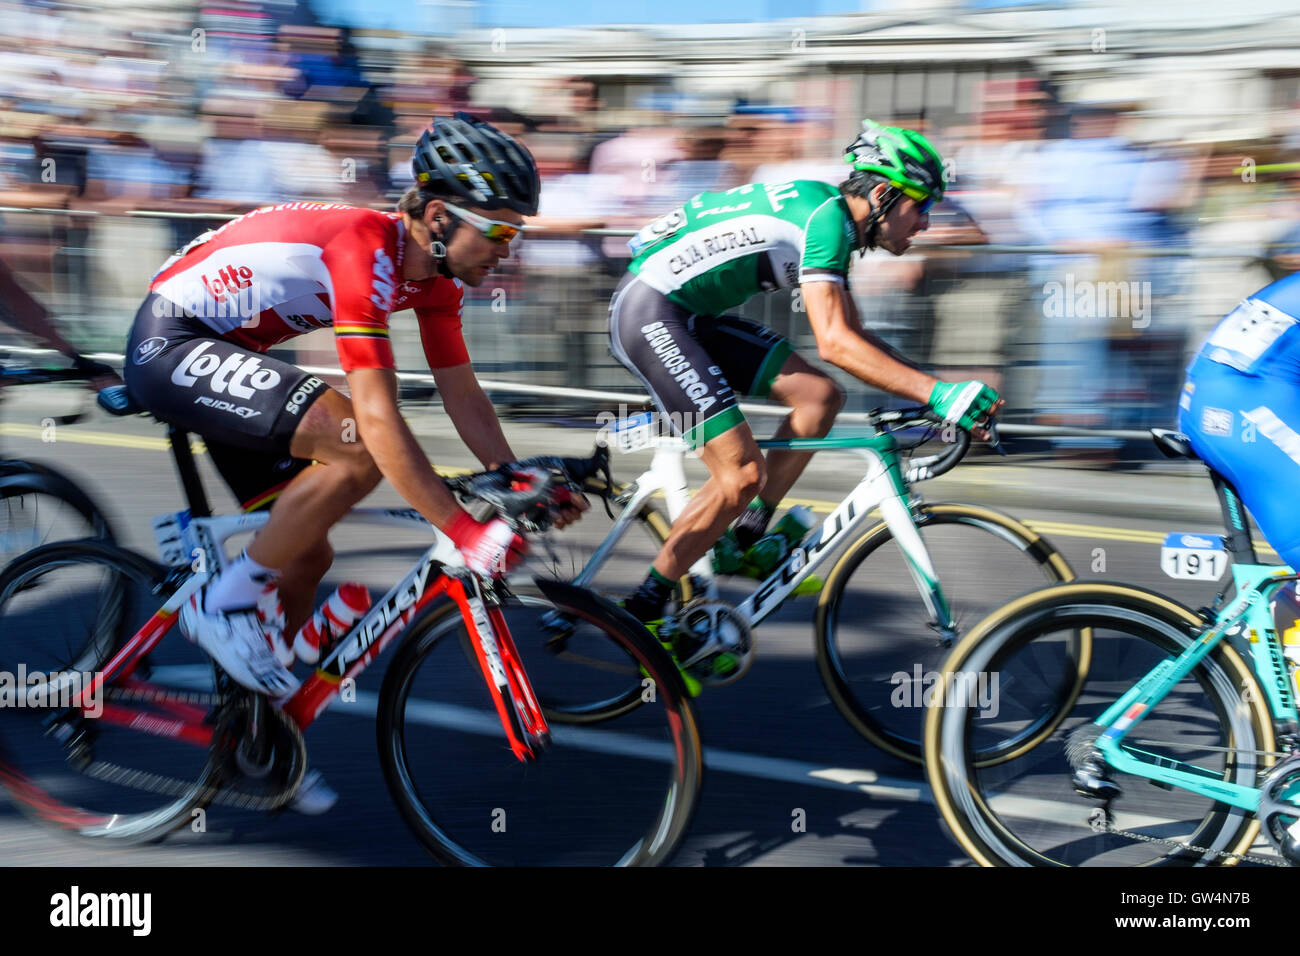 Riders on the Tour of Britain cycle race 2016 speed through Central London Stock Photo